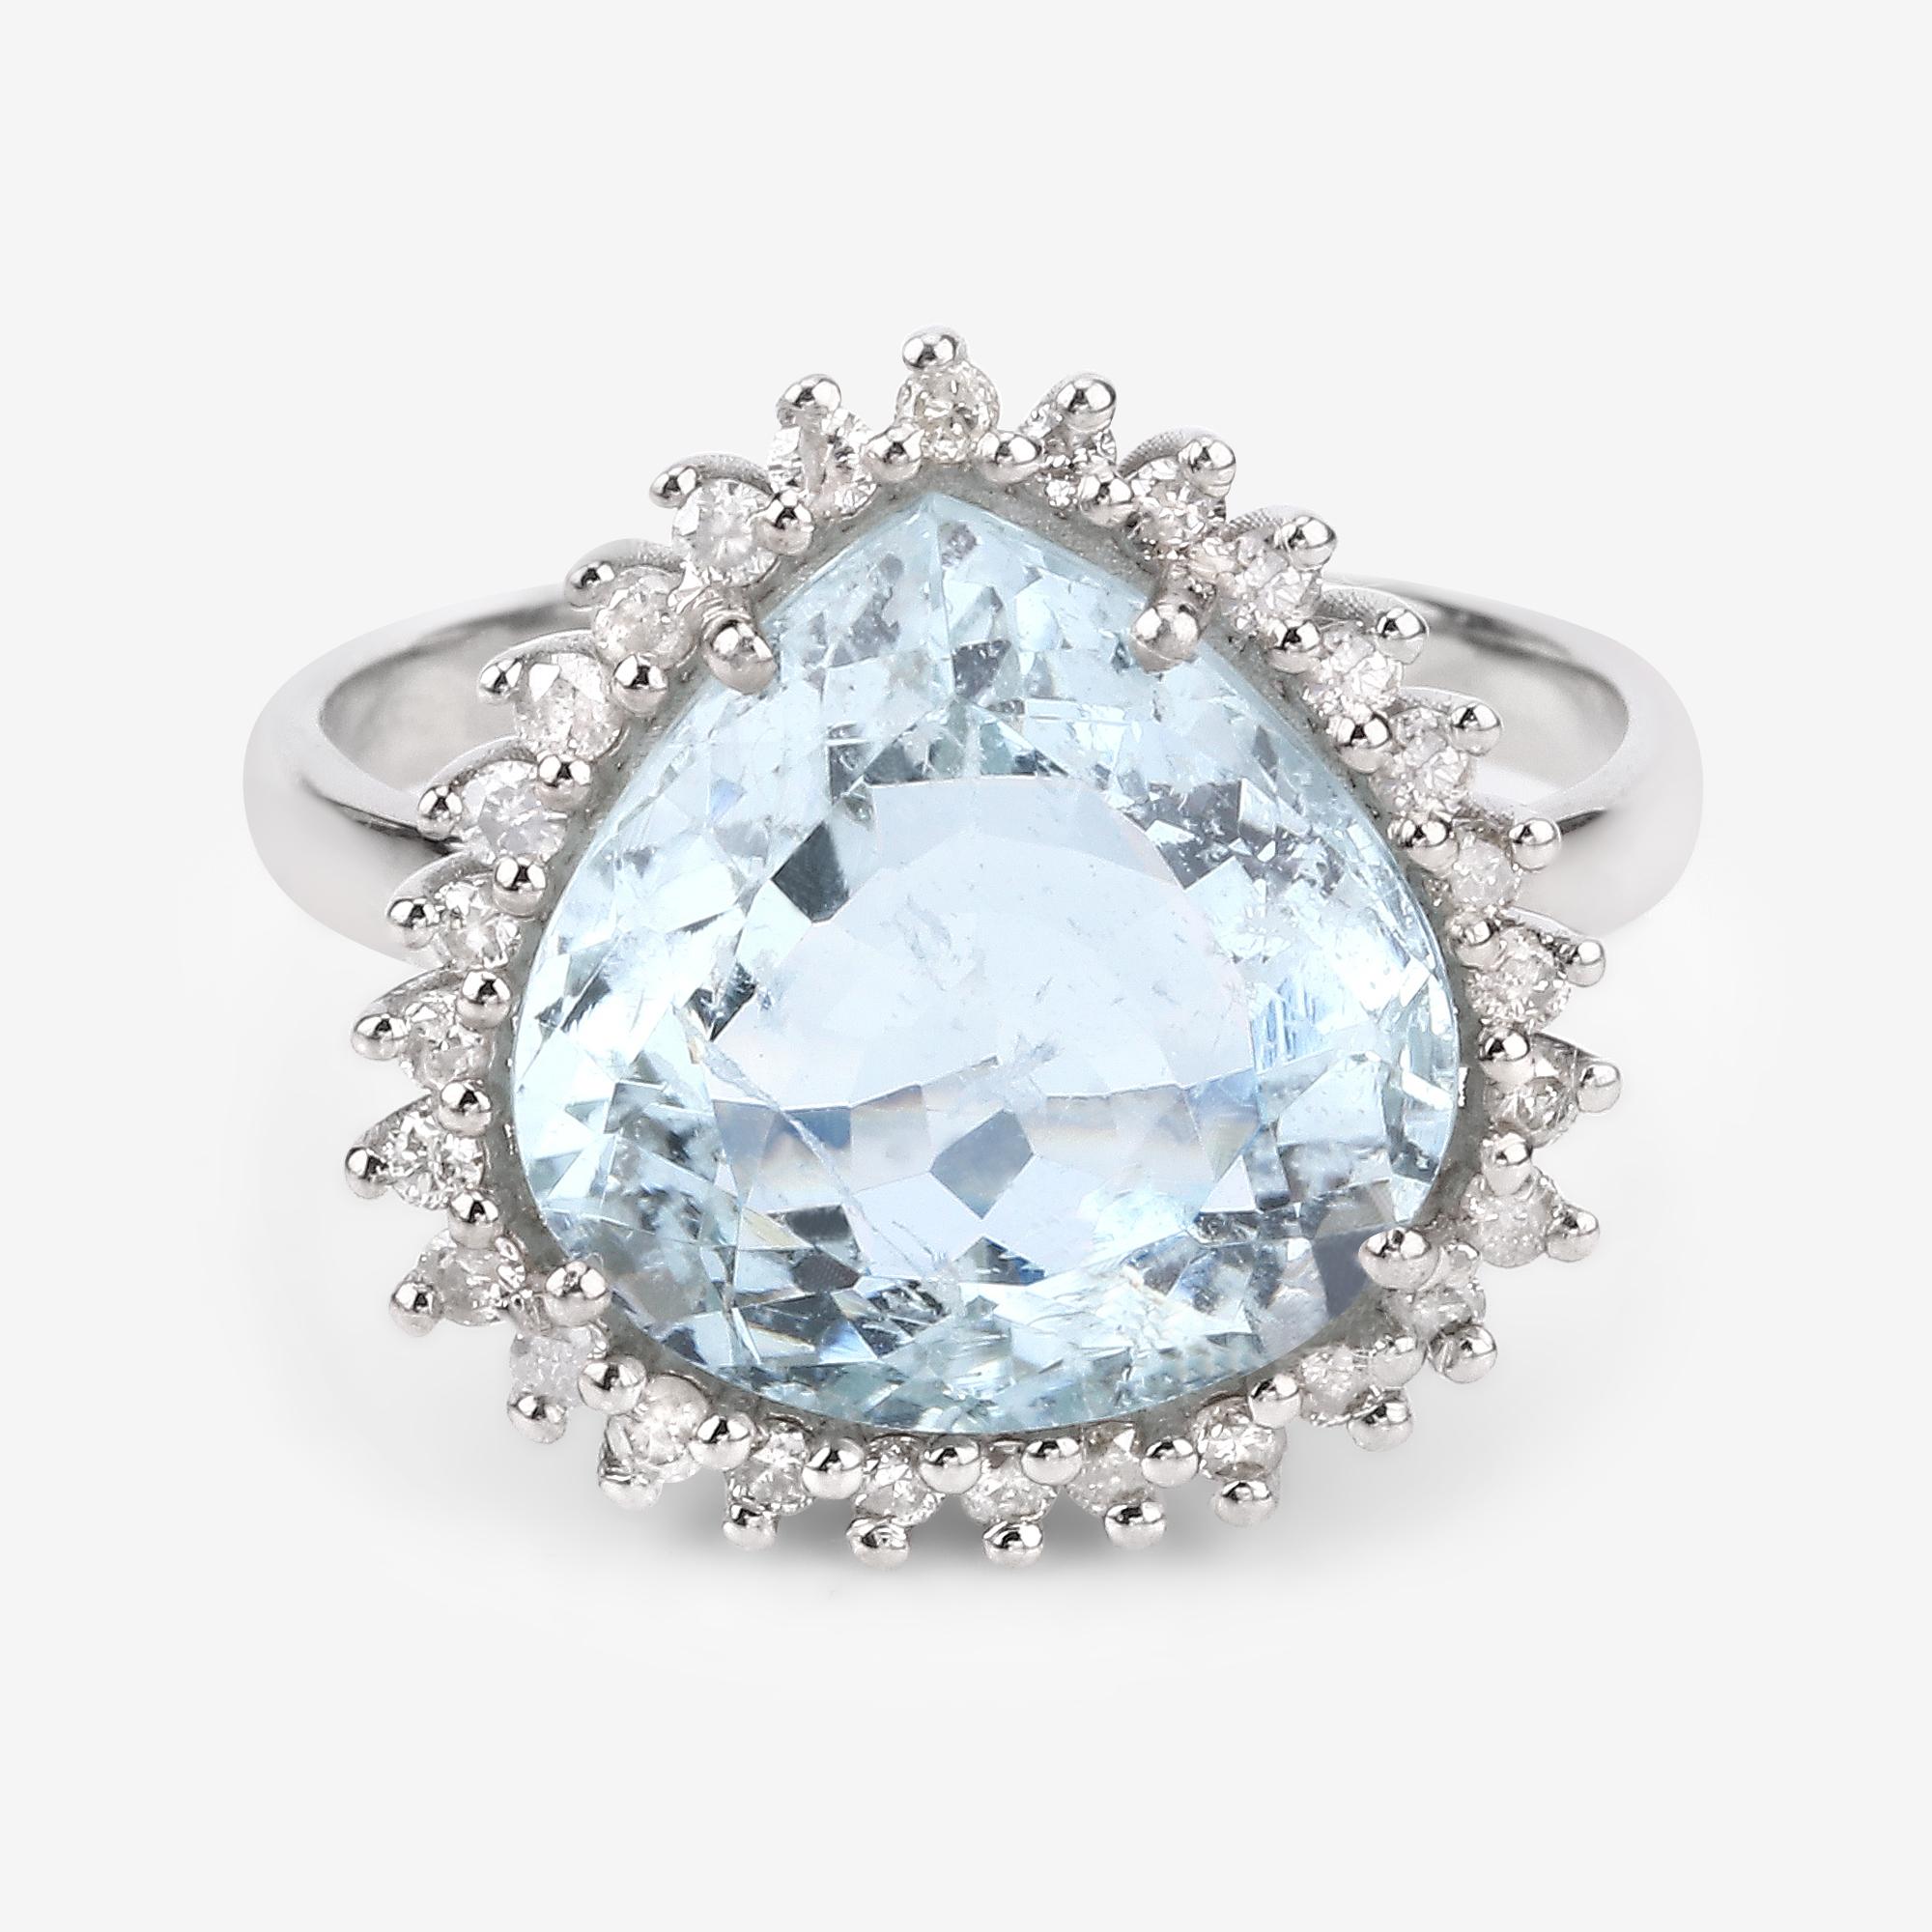 6.40cttw Aquamarine with Diamonds 0.45cttw Halo Sterling Silver Ring 2